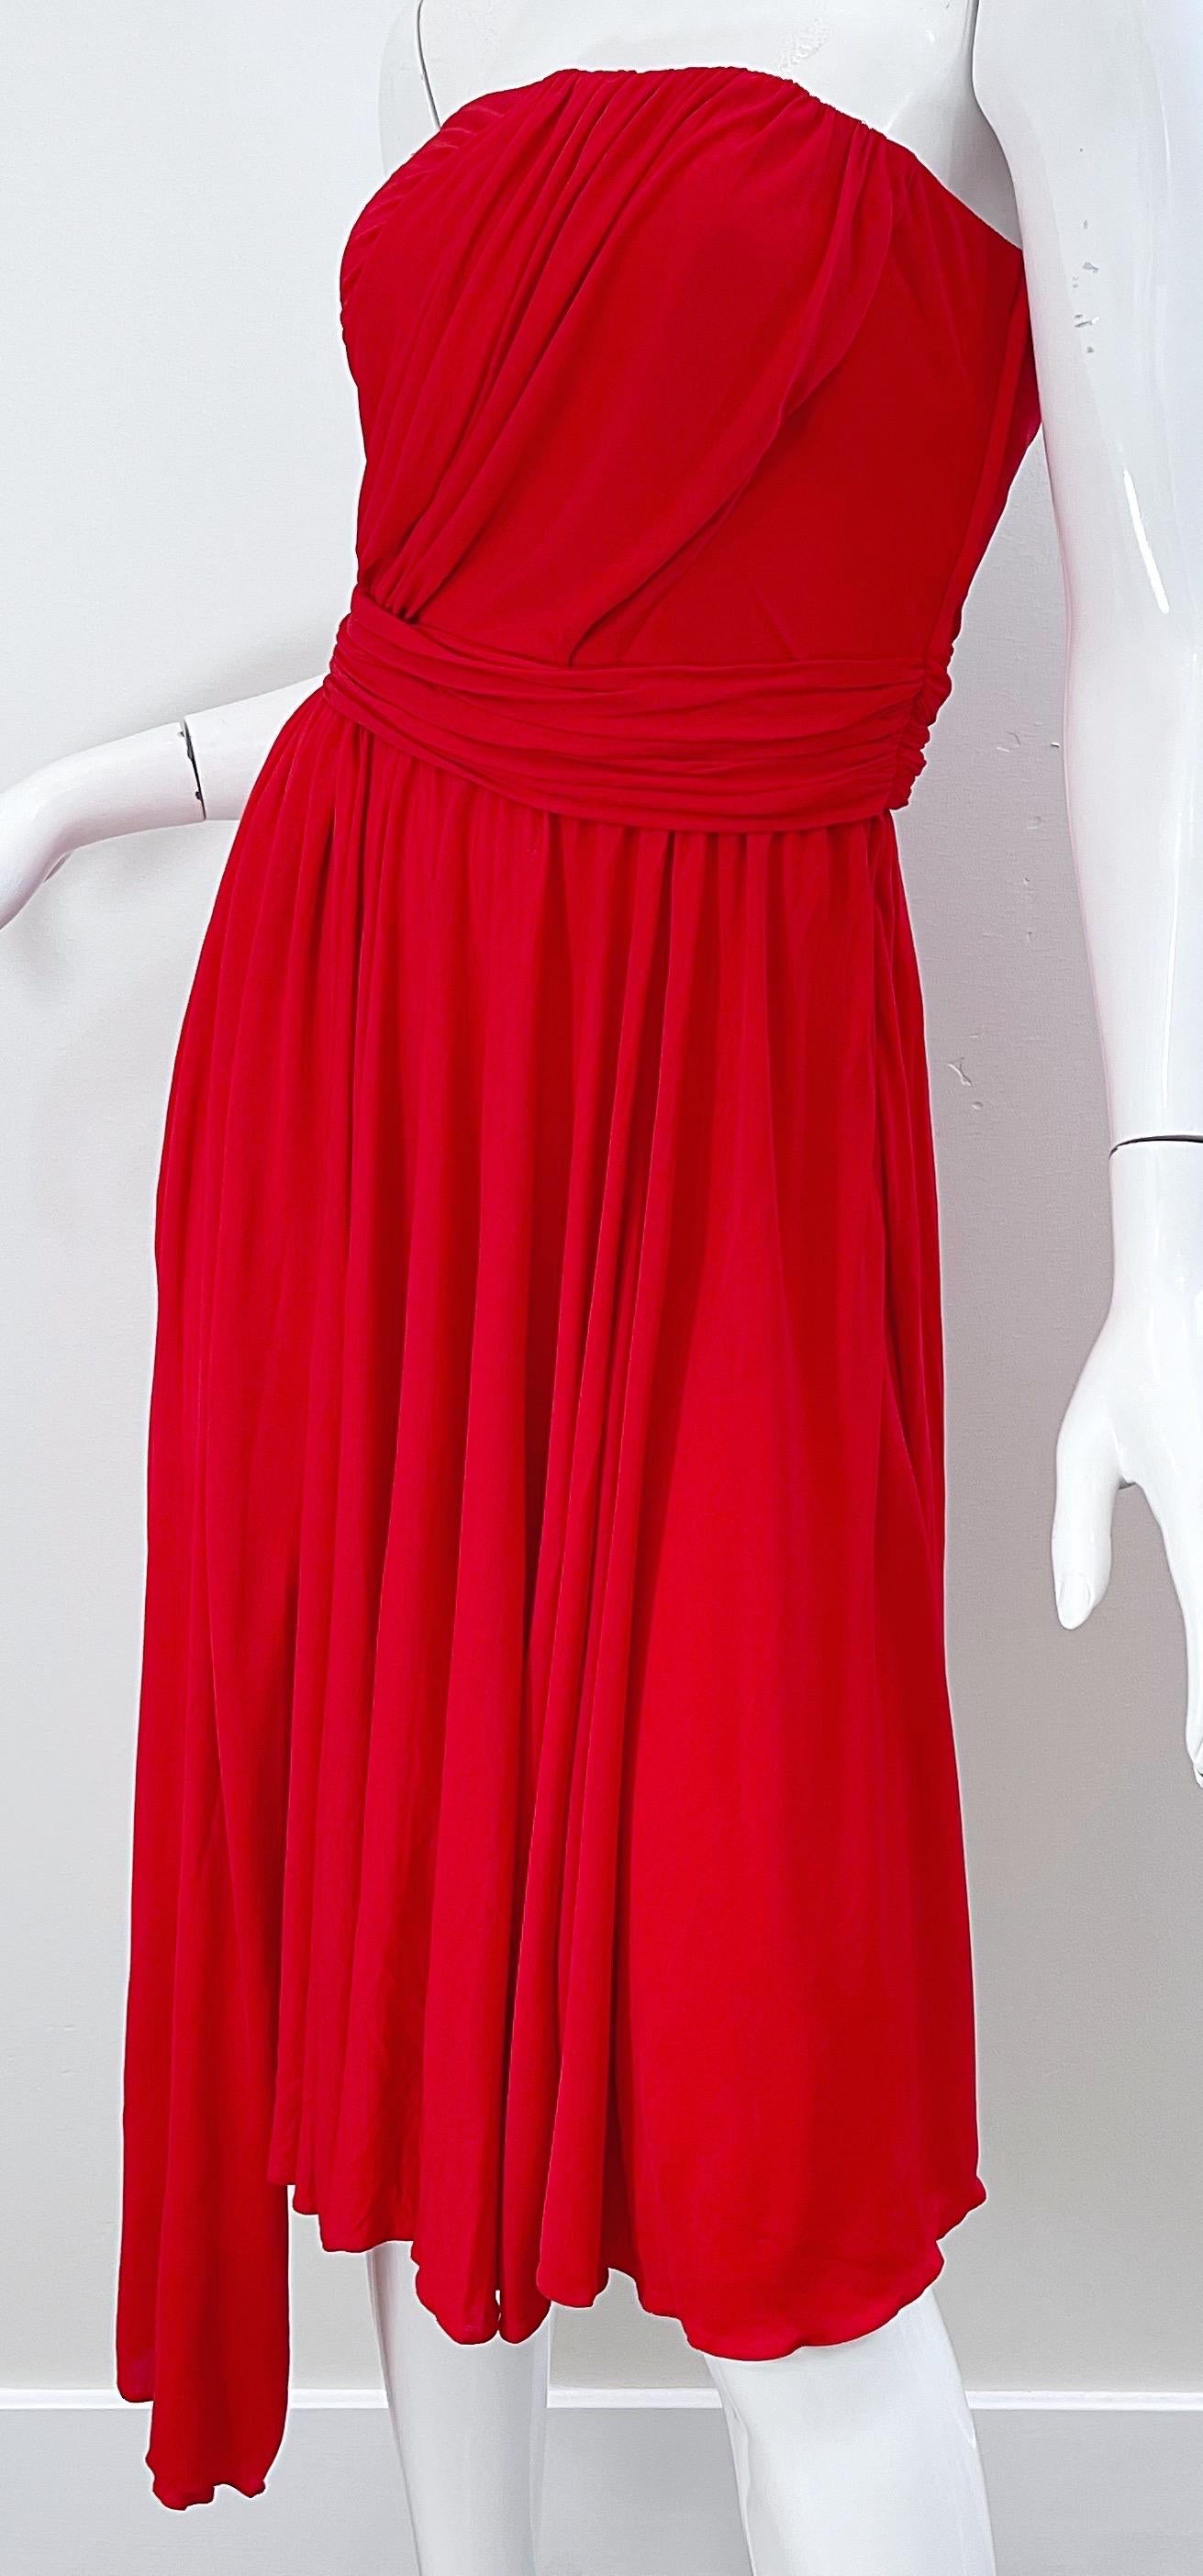 Runway Yves Saint Laurent S/S 1989 Lipstick Red Rayon Jersey Strapless 80s Dress For Sale 7